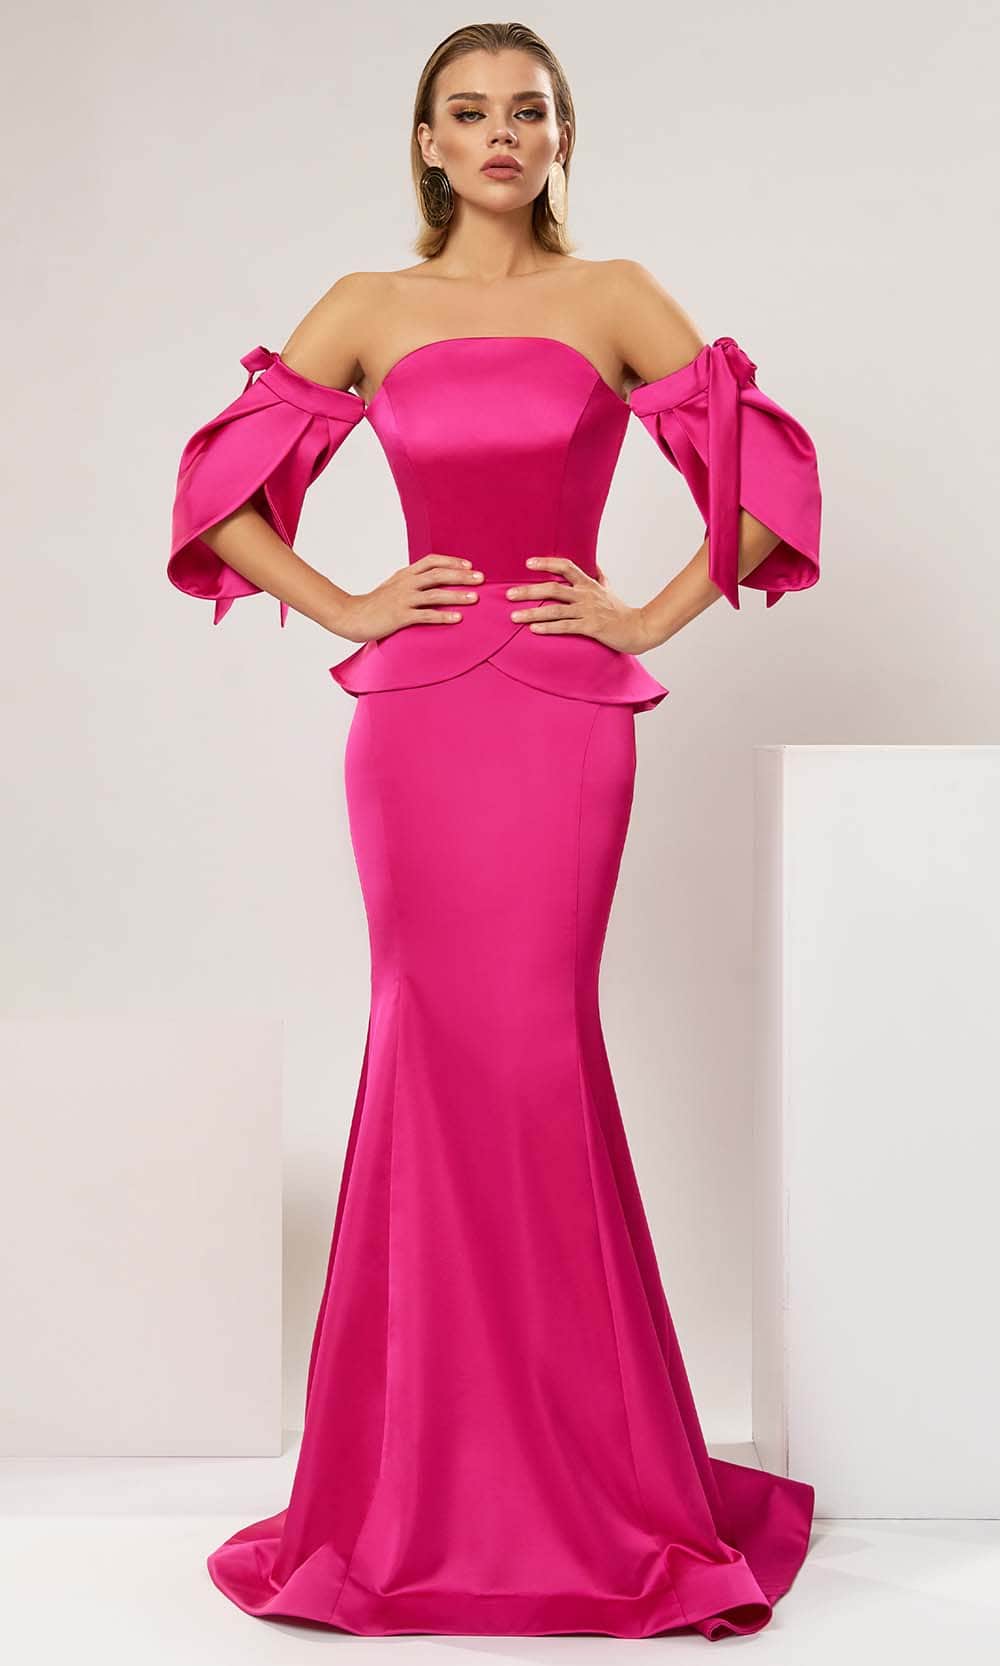 Image of Cristallini Satin Lily CA17 - Off Shoulder Peplum Evening Gown